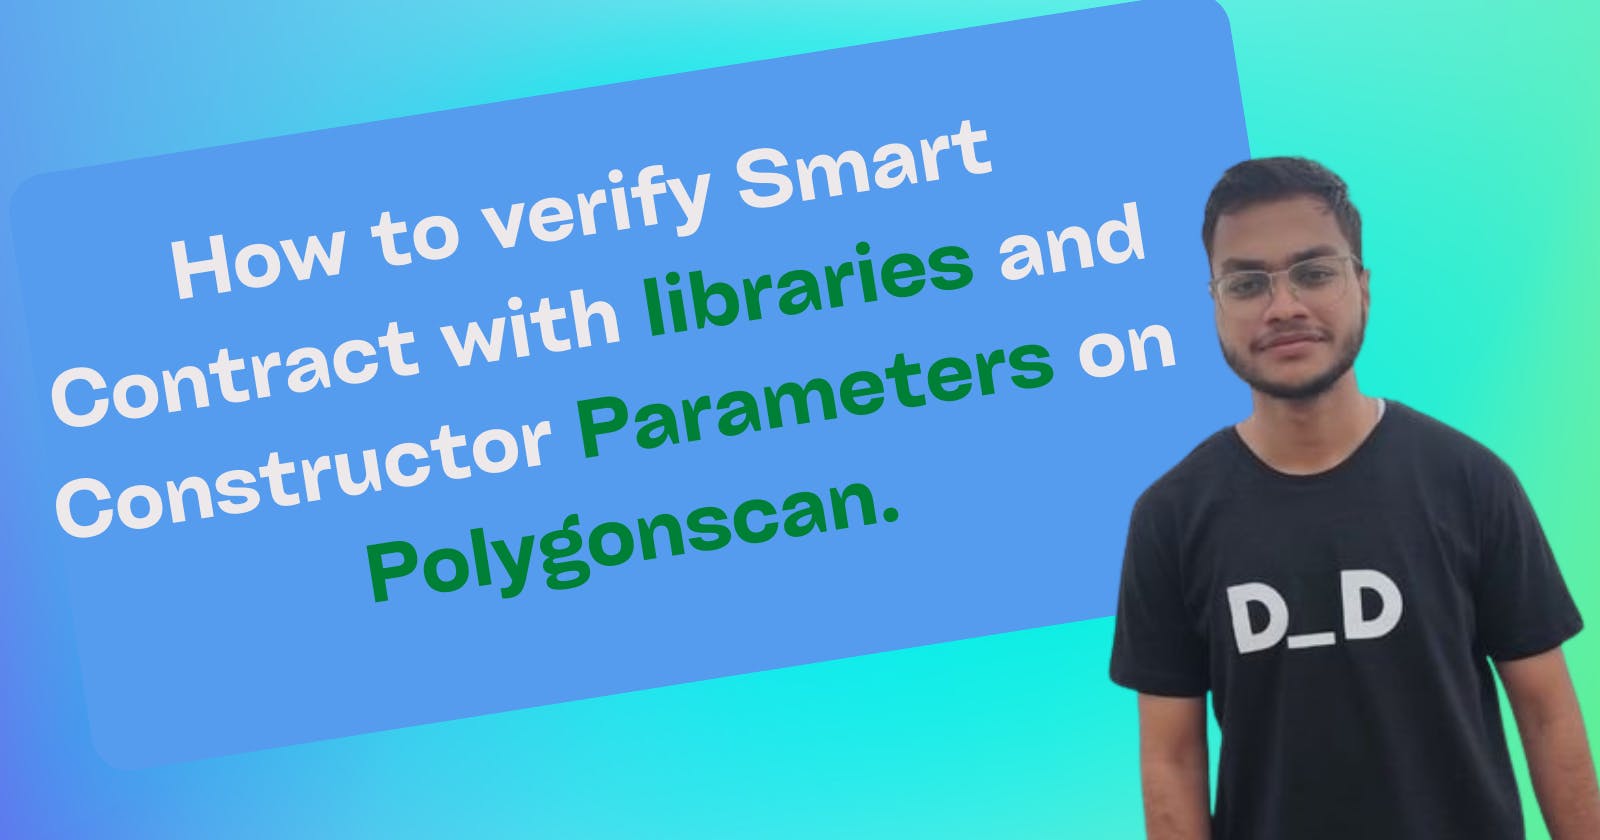 How to Verify Smart Contracts with Libraries and Constructor Parameters on Polygonscan.